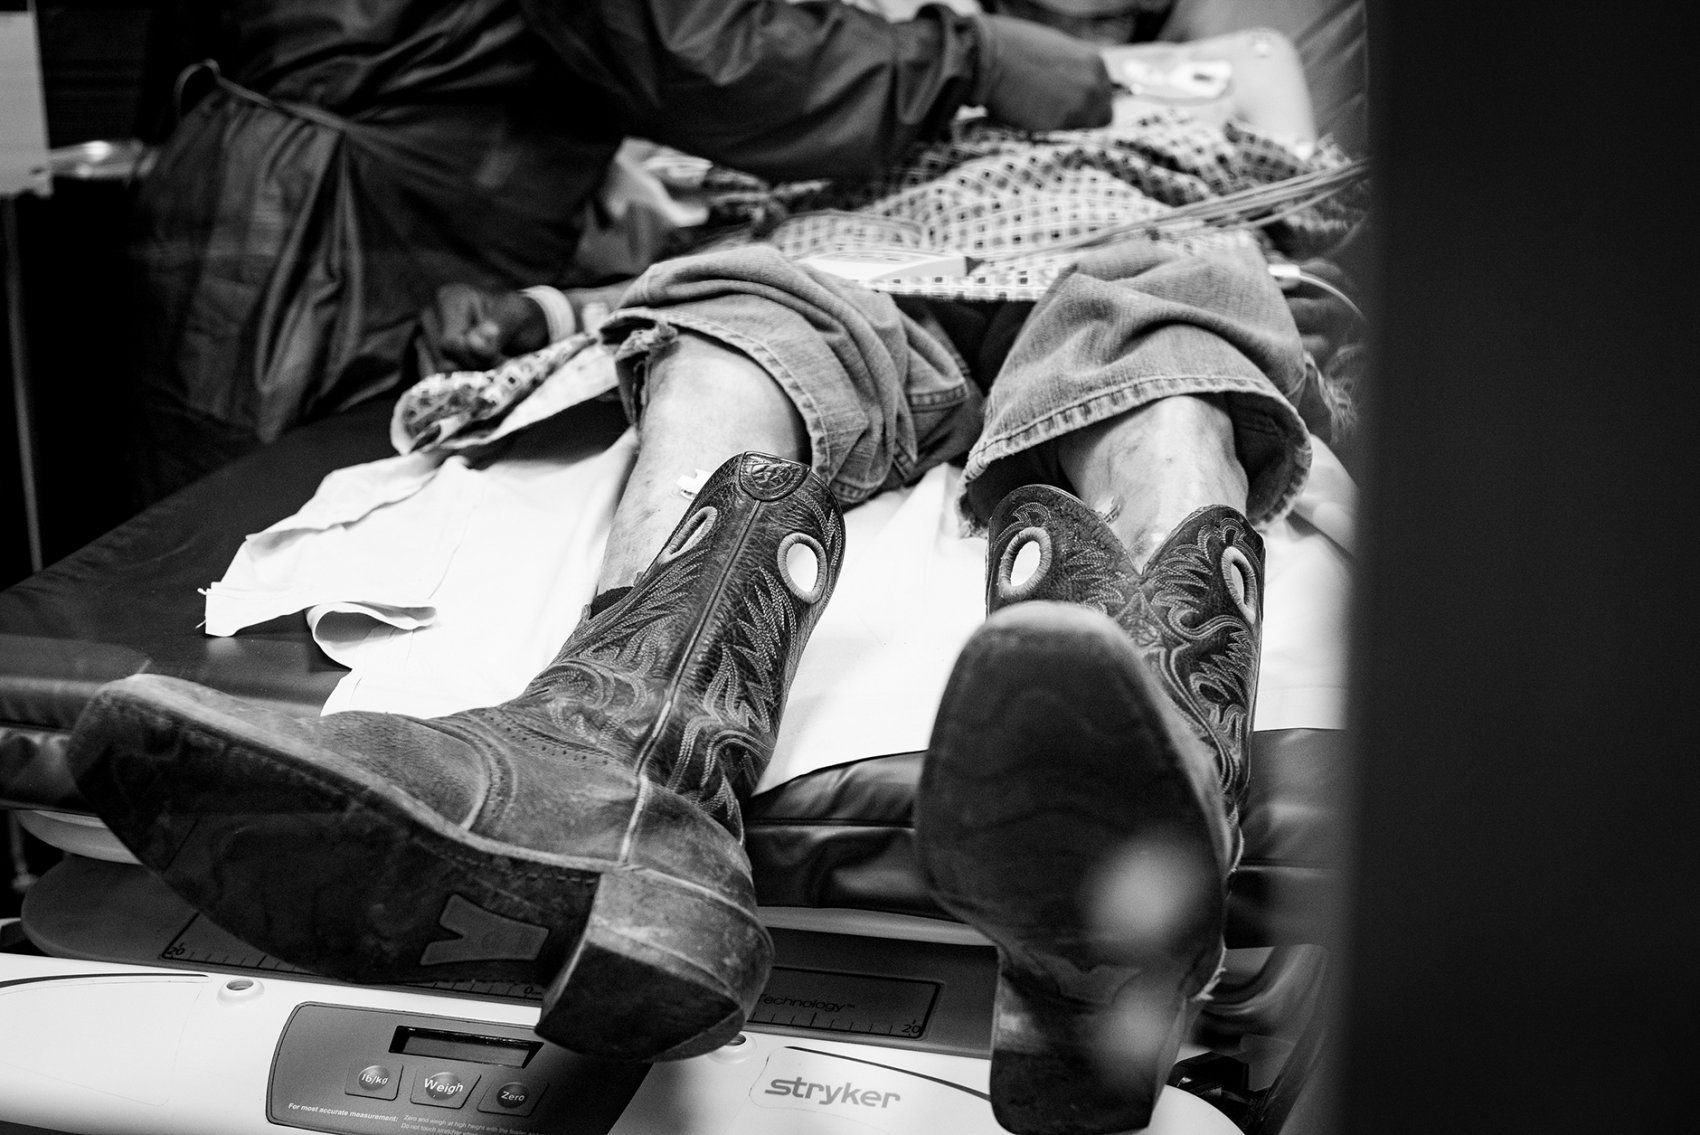 patient with cowboy boots on lies on a triage medical table